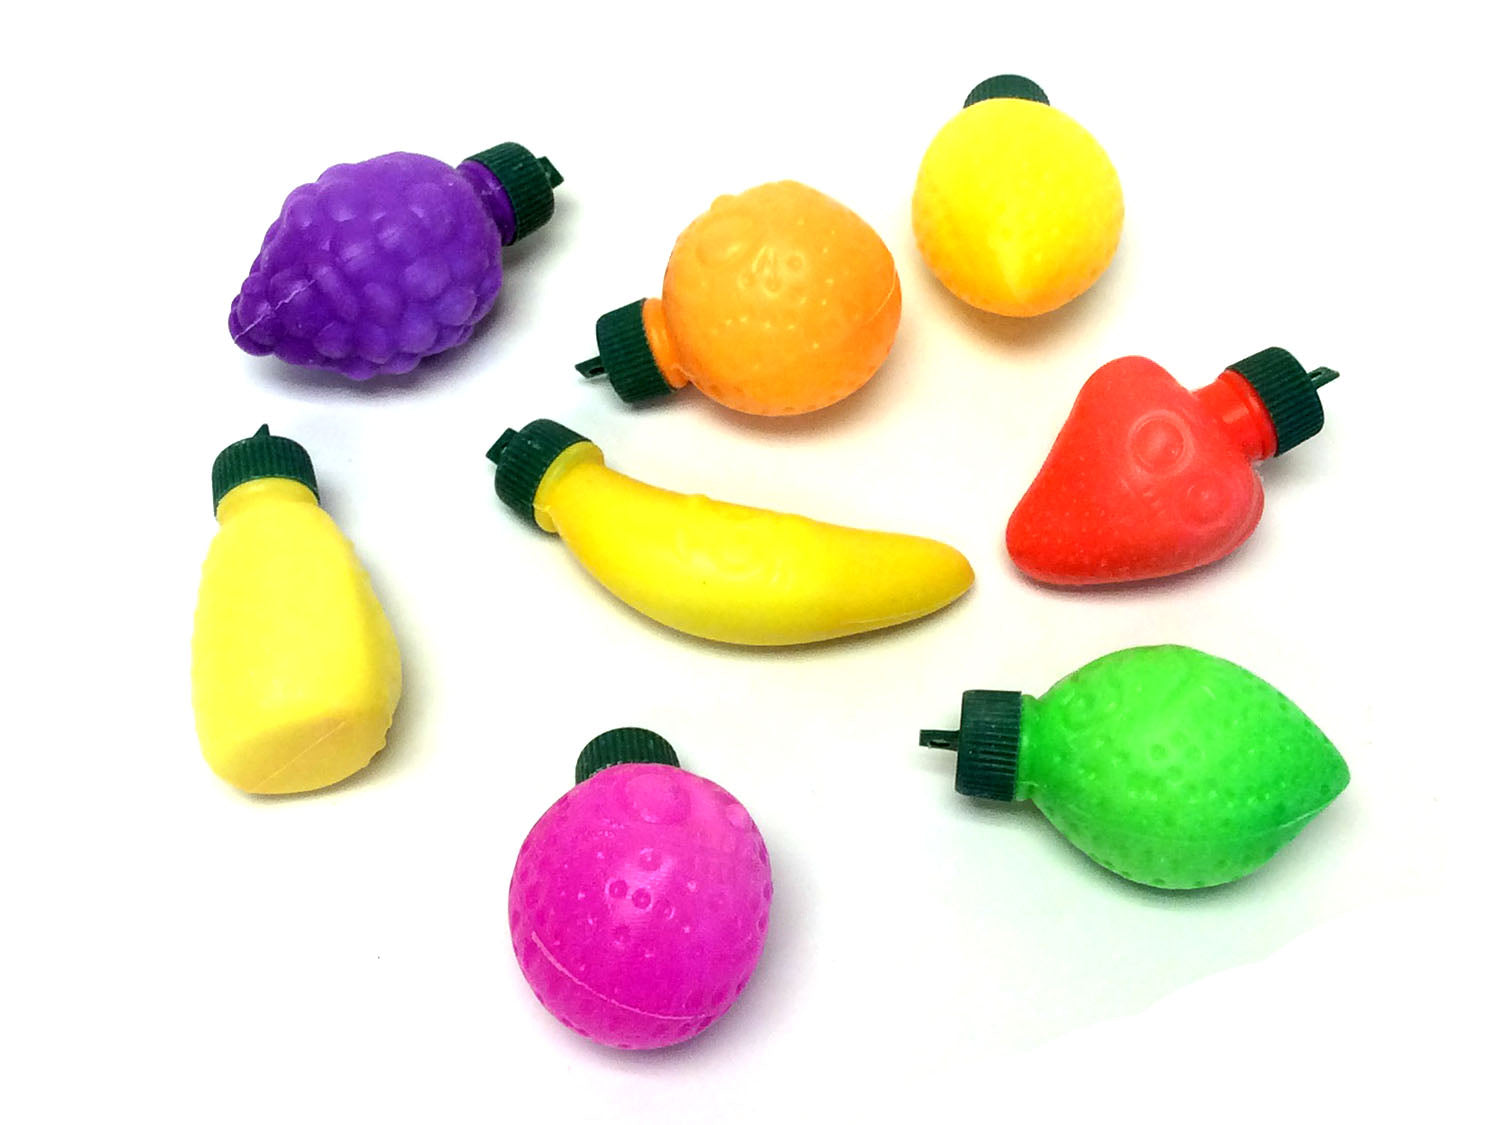 Candy Powder-Filled Plastic Fruits - 72 piece bag